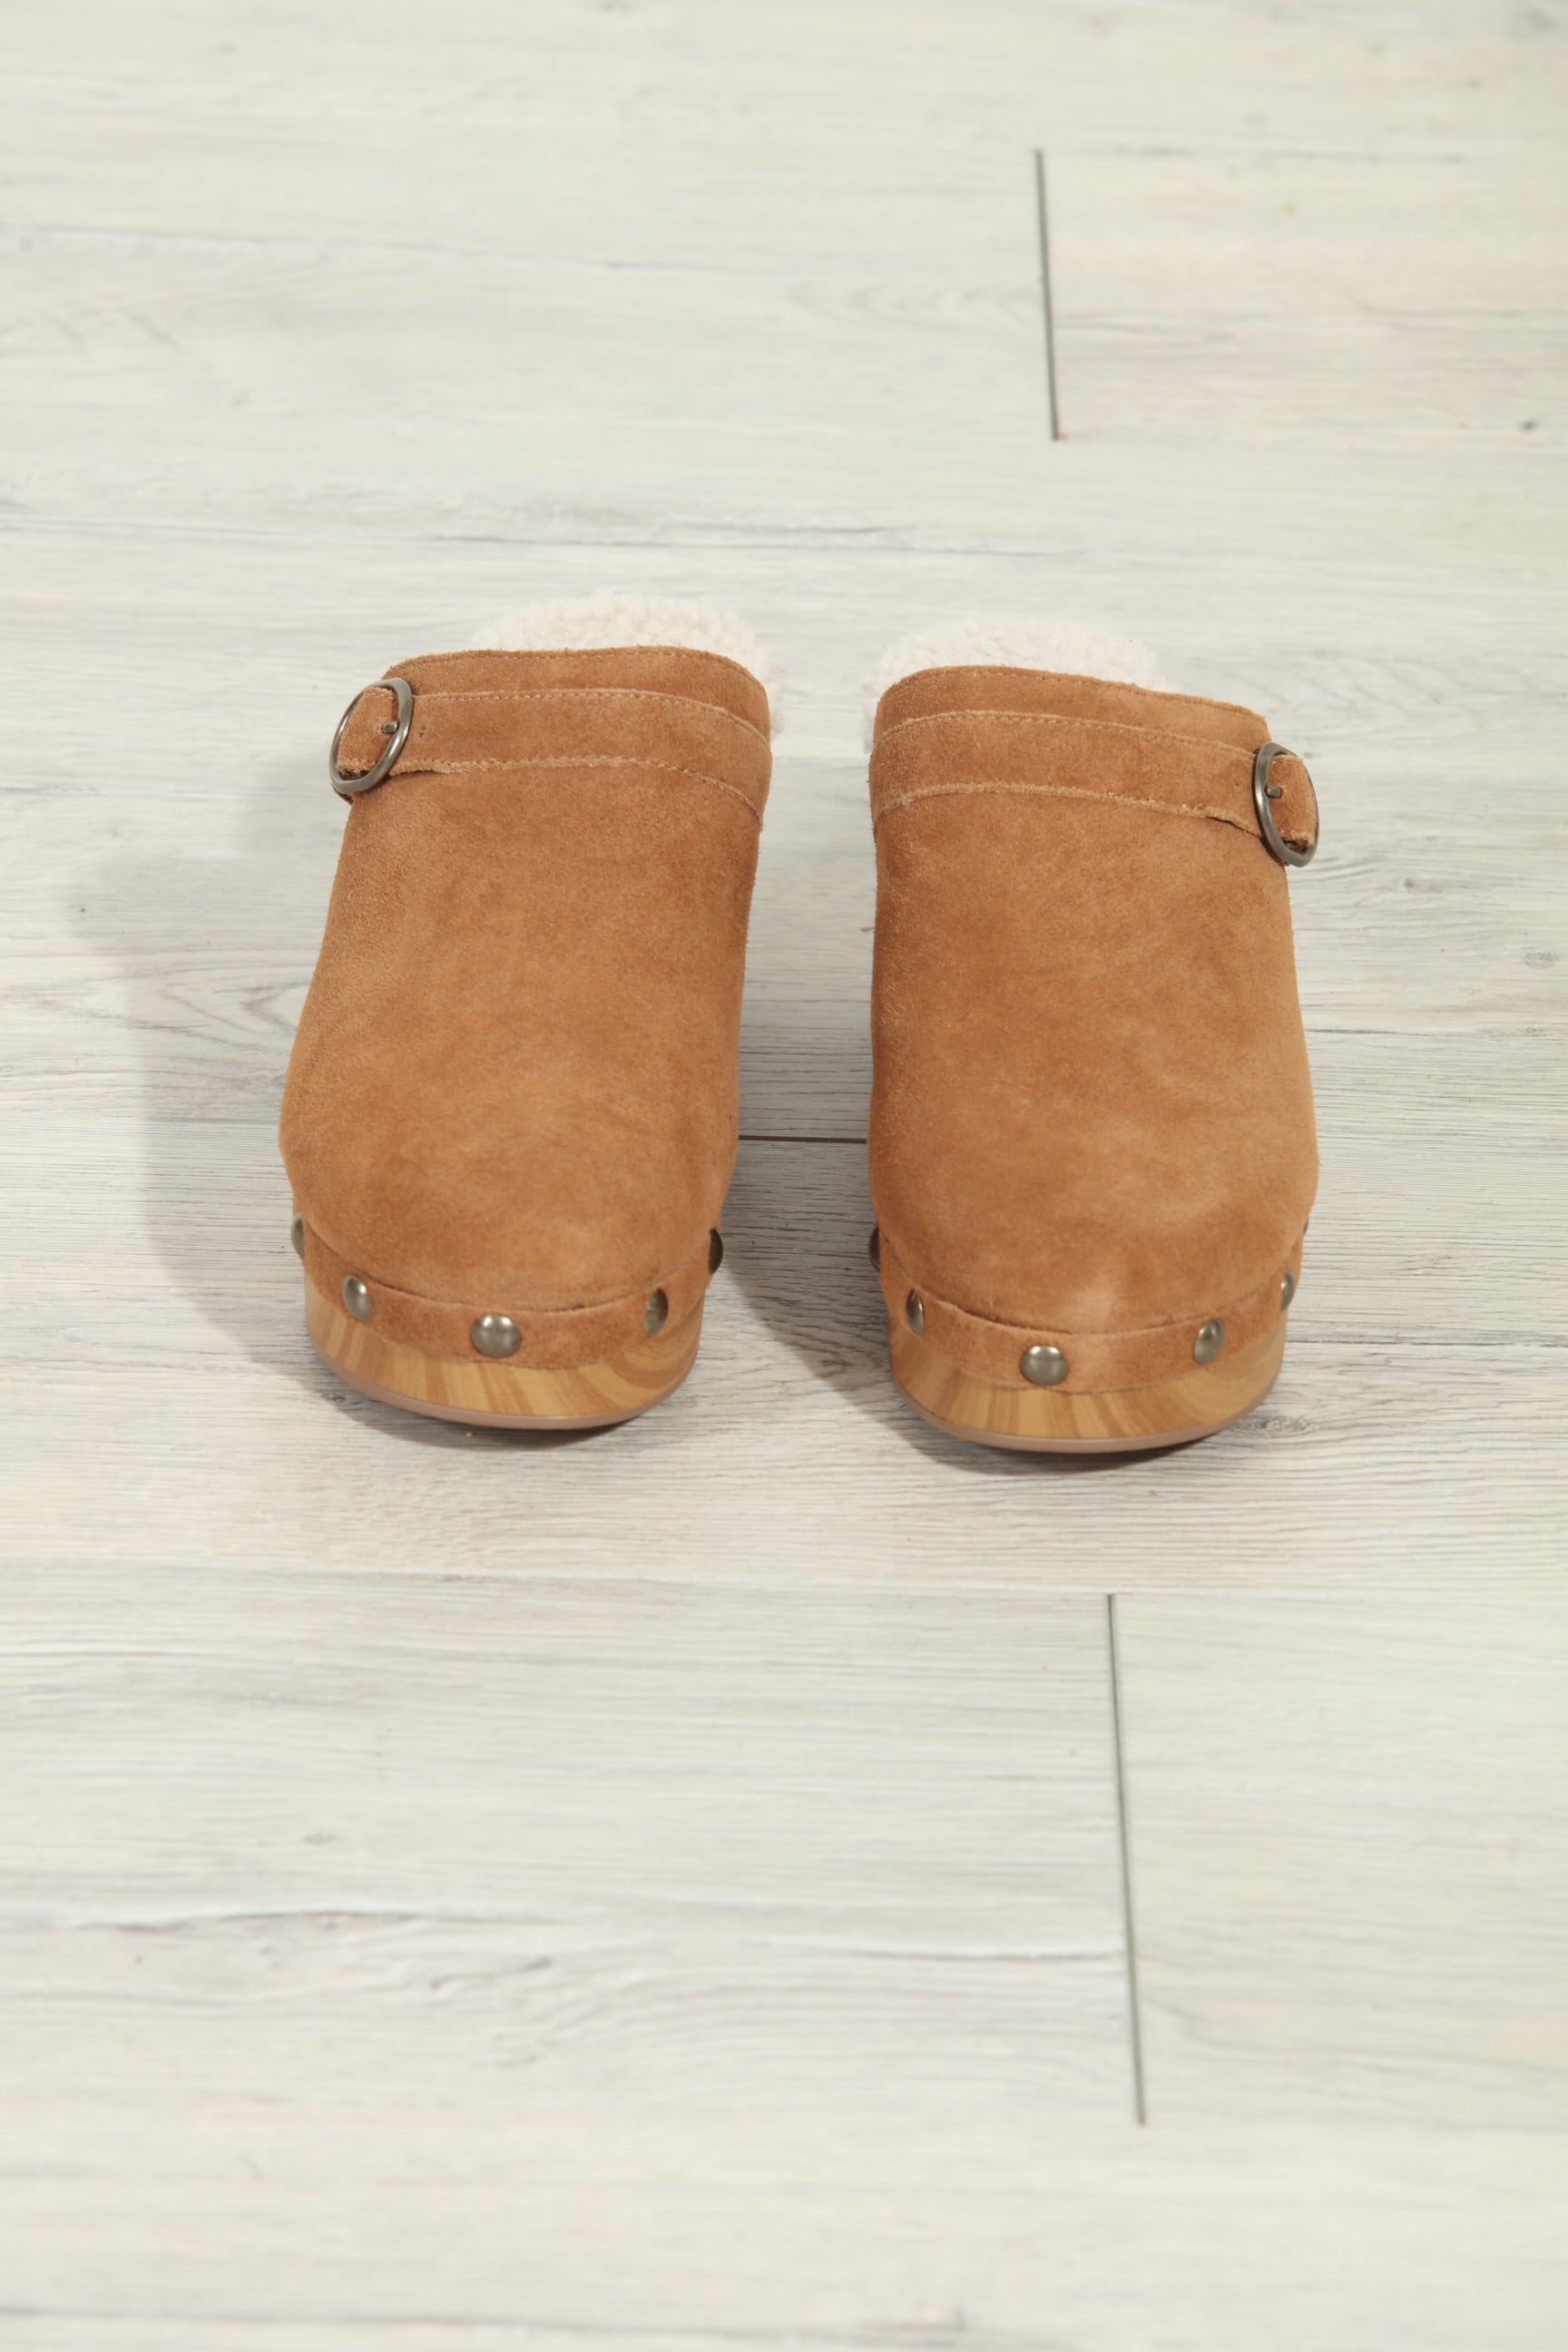 Chinese Laundry- Carlie Suede Clog- Brown-FINAL SALE